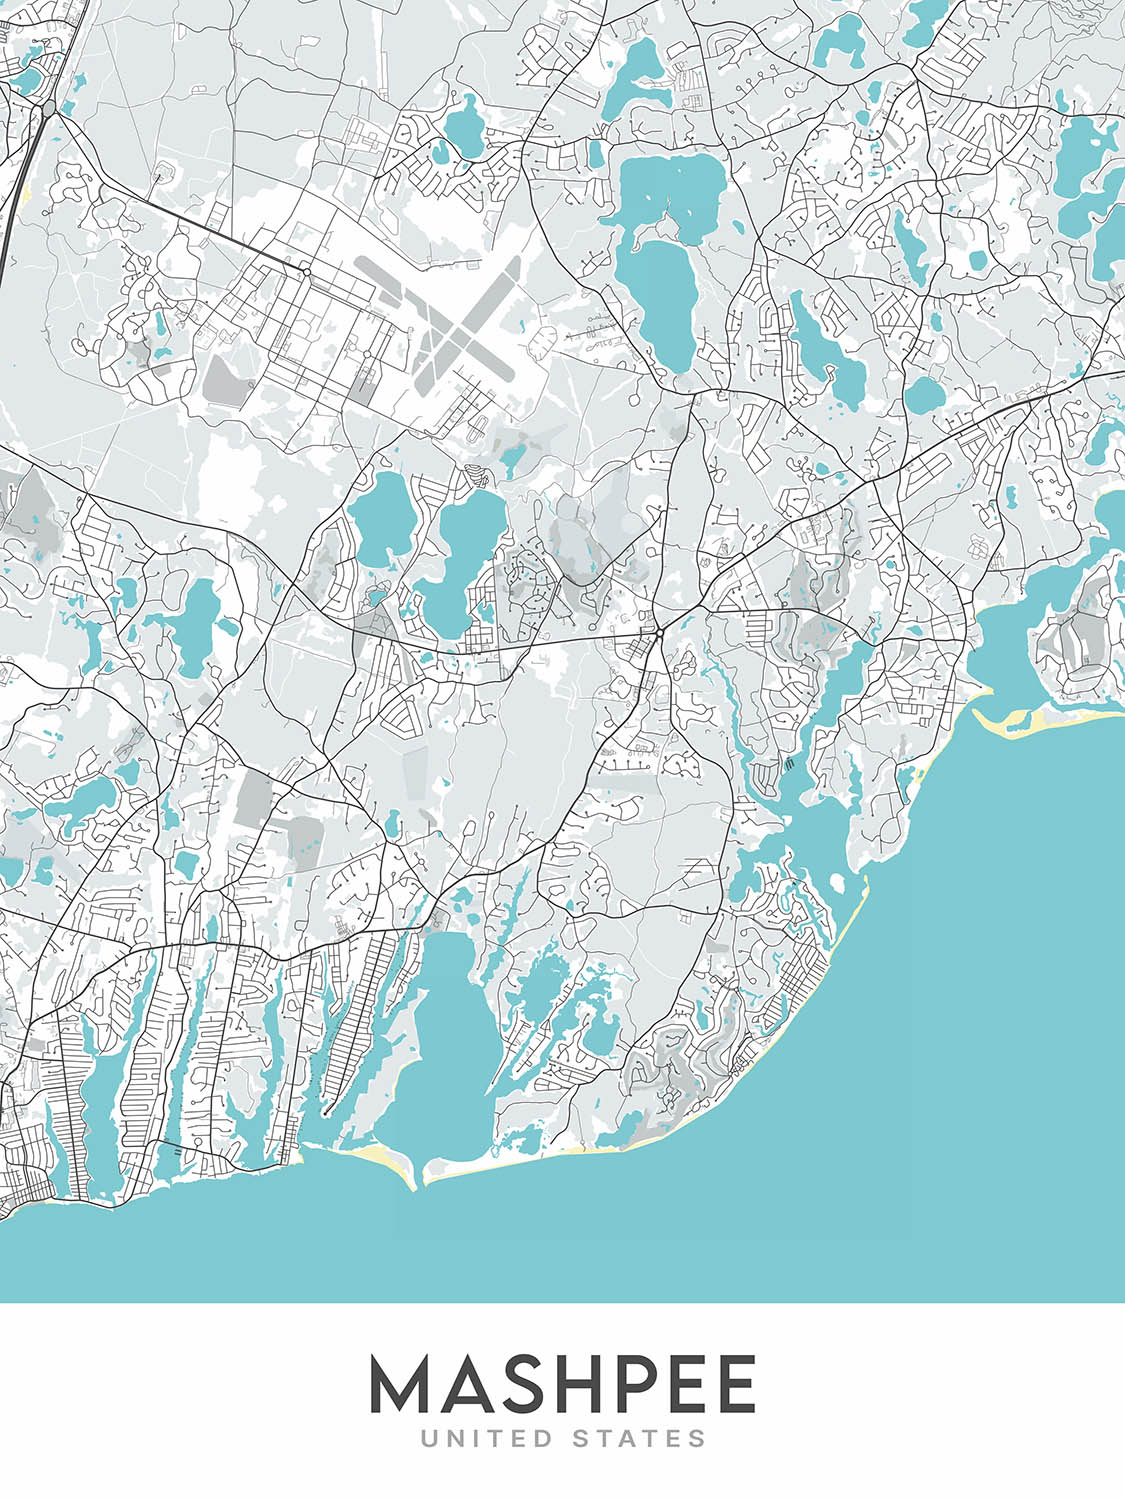 Modern City Map of Mashpee, MA: Commons, South Cape Beach State Park, Waquoit Bay Reserve, Popponesset Beach, Santuit Pond